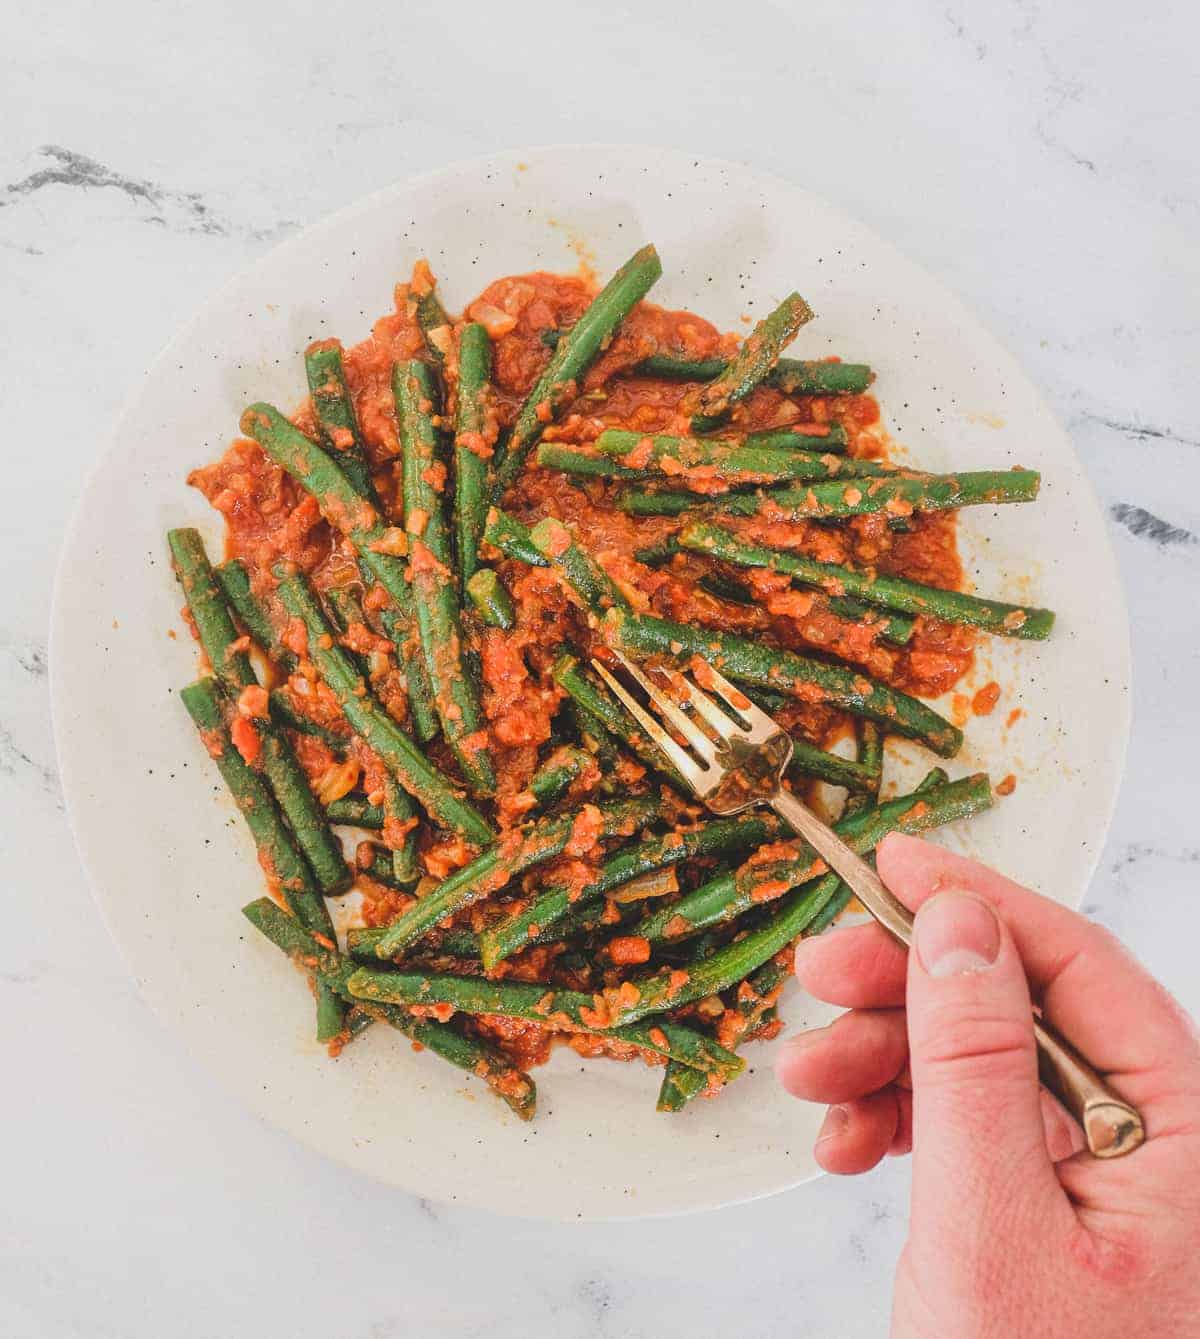 Green Beans (French Beans) cooked in a tangy red tomato sauce with Turkish Aleppo Pepper